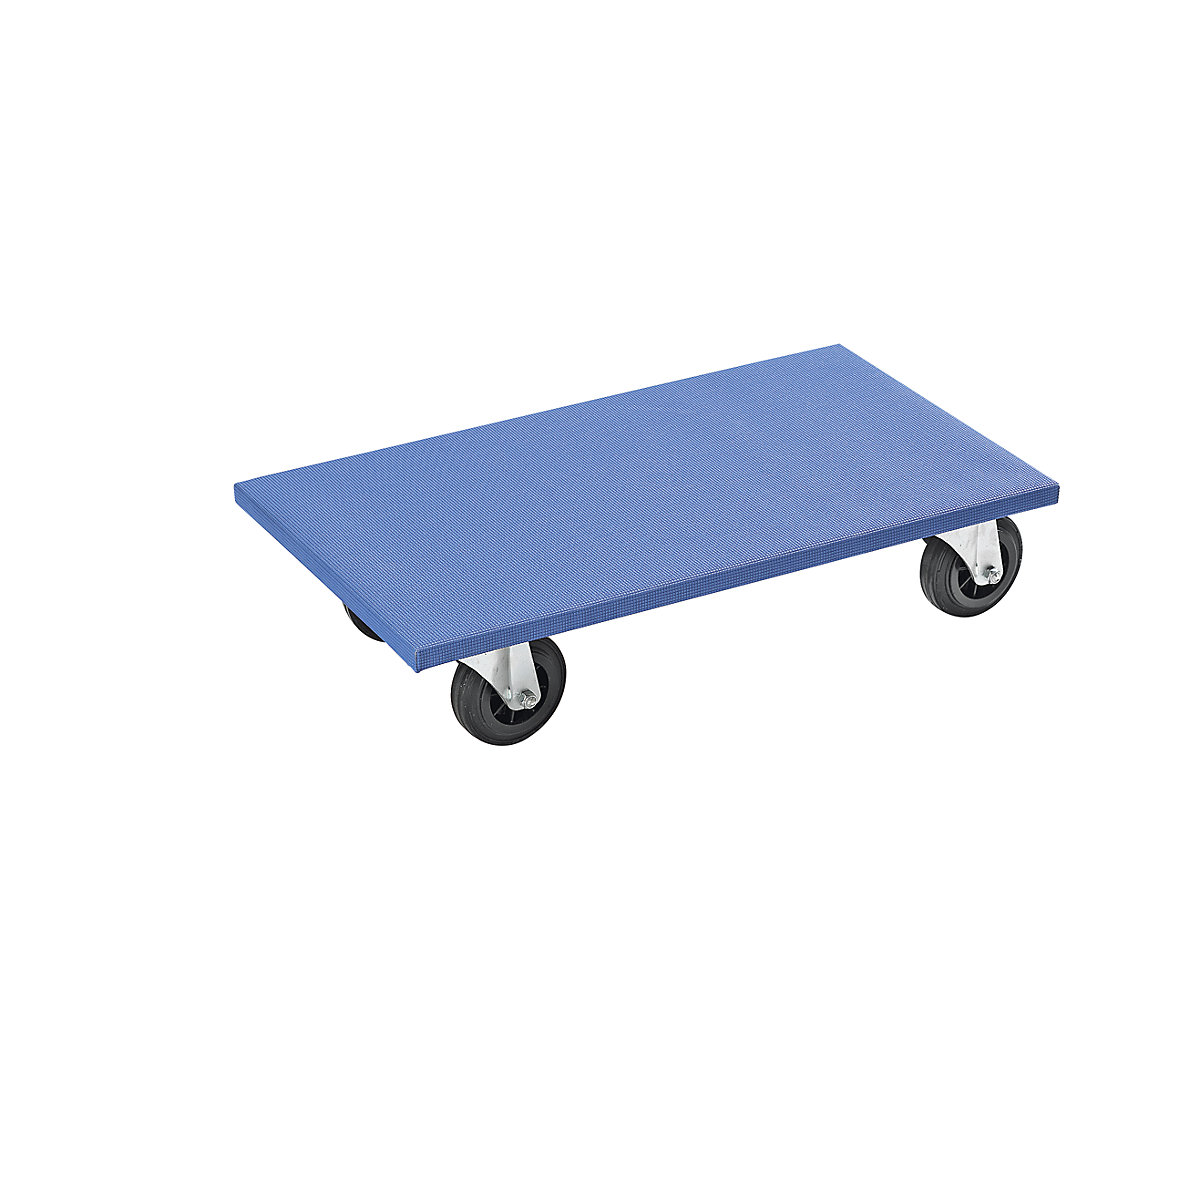 Furniture dolly, LxWxH 600 x 350 x 145 mm, pack of 2, max. load 300 kg, 5+ packs-6